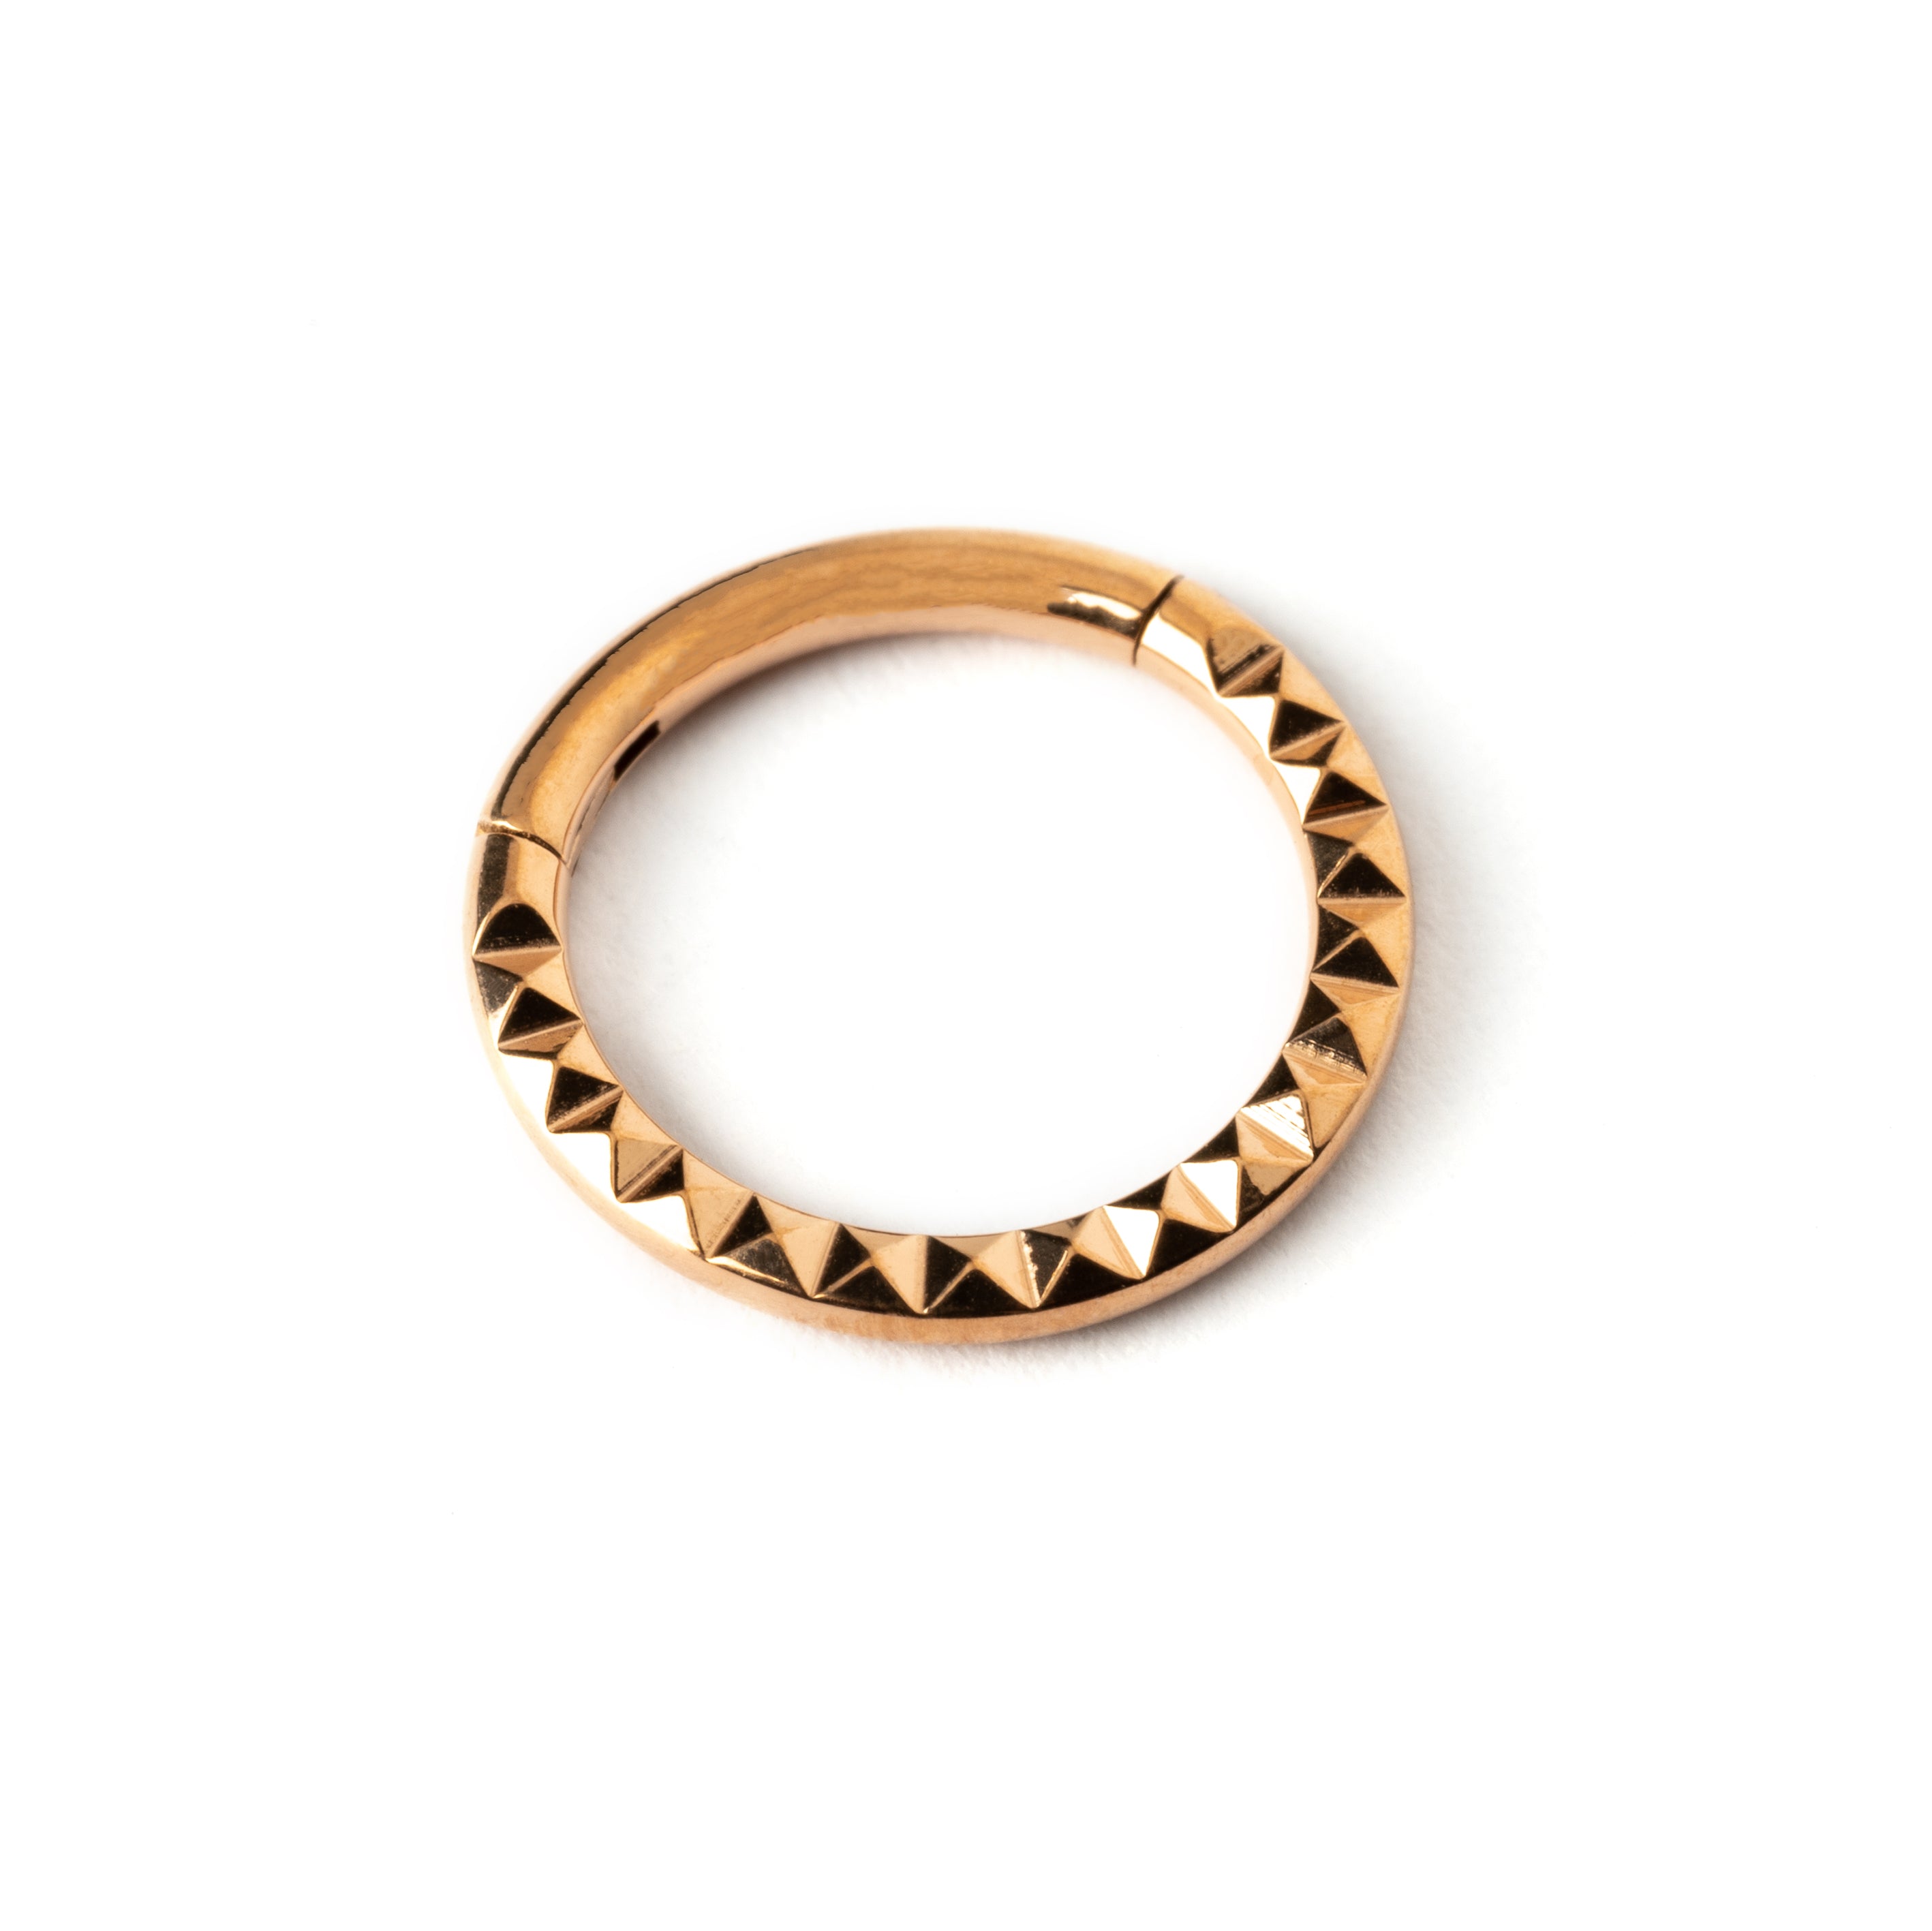 Giza rose gold surgical steel clicker ring with 3d pyramid patter side view